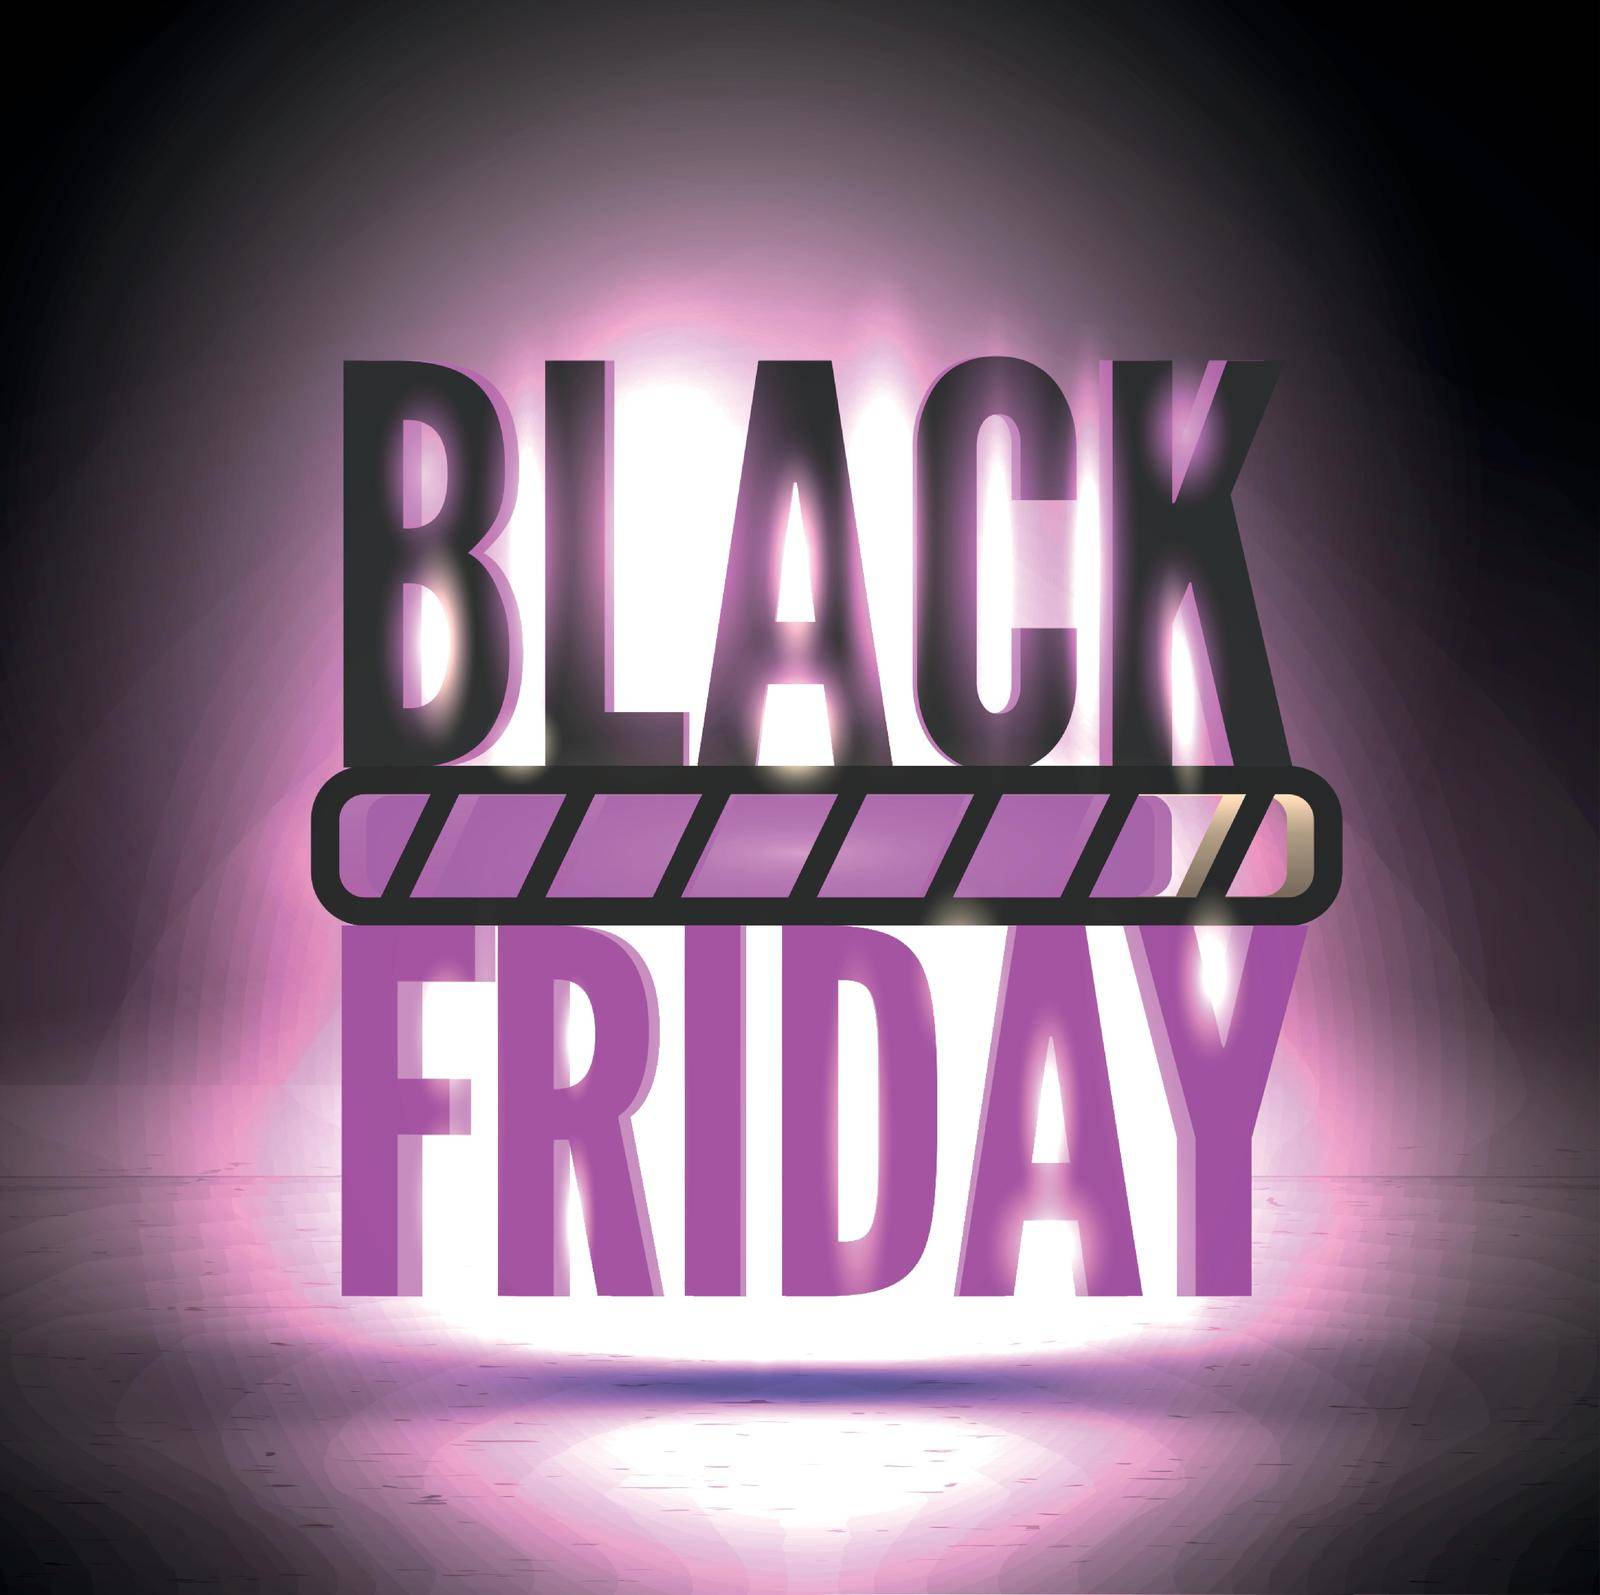 Black friday offer with Spotlight illuminated text on dark background. Trendy sale coming discounts advert and with progress bar. Special price pink banner design. Minimalistic vector poster template.